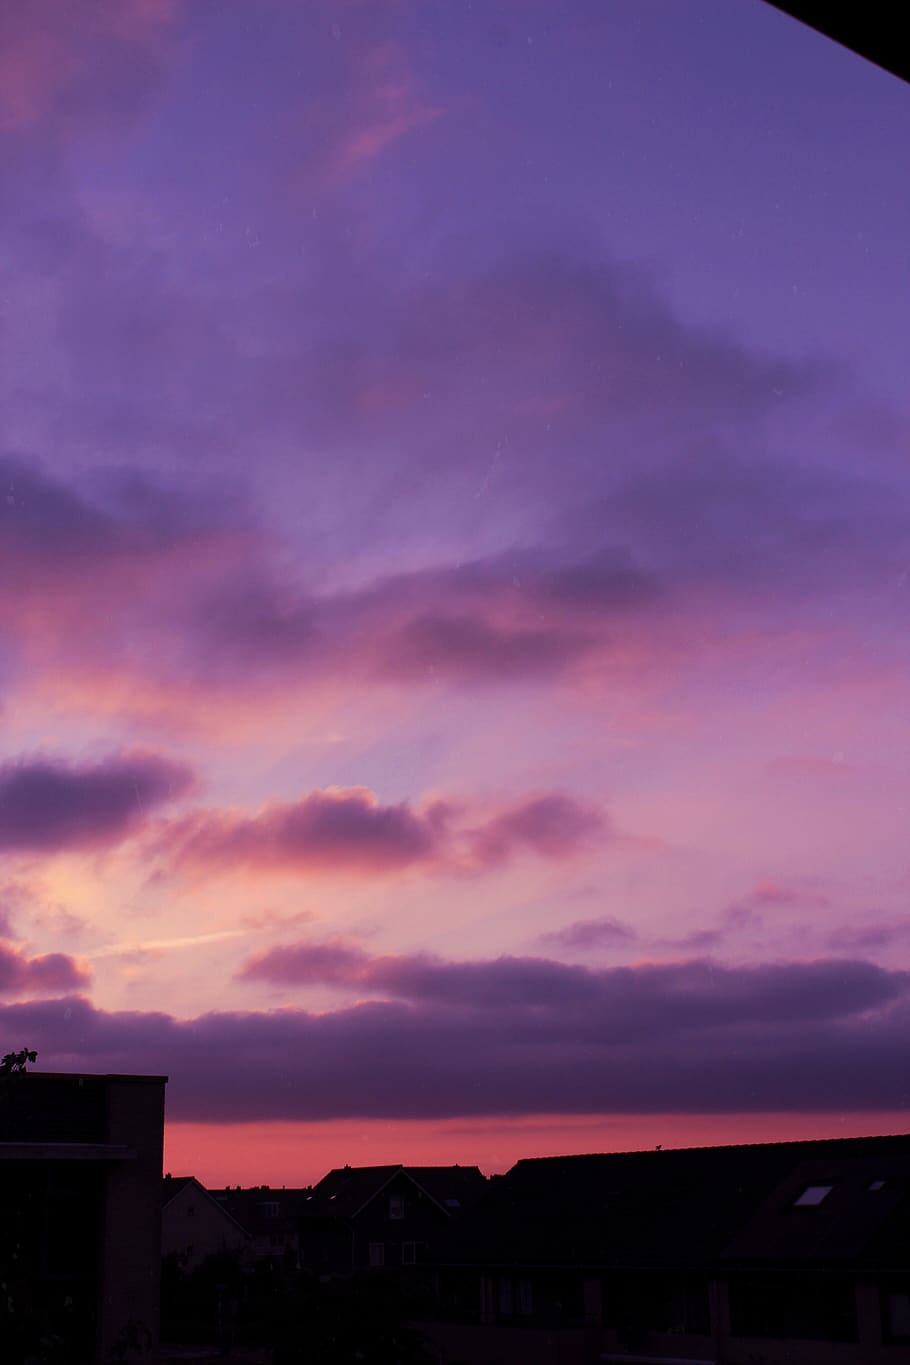 A sky with clouds and the sun setting - Pastel purple